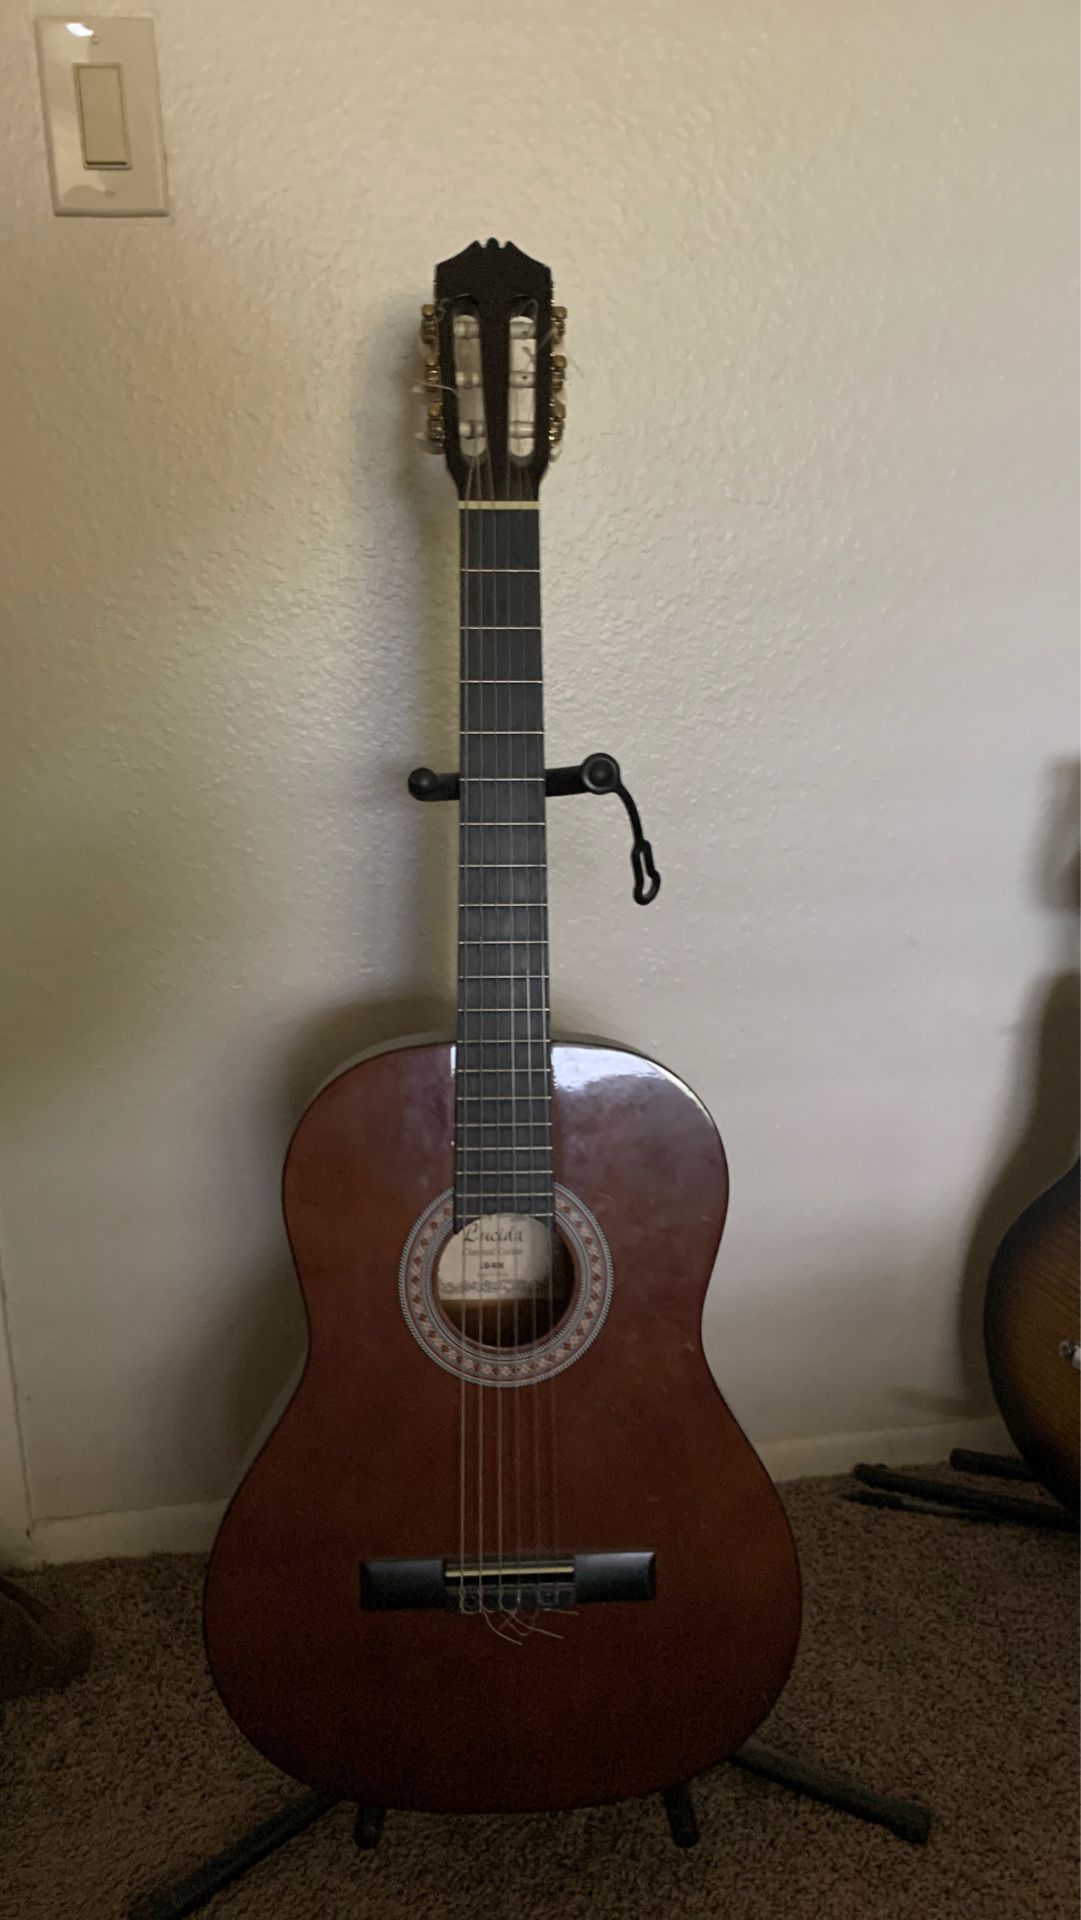 Acoustic guitar with acoustic pickup